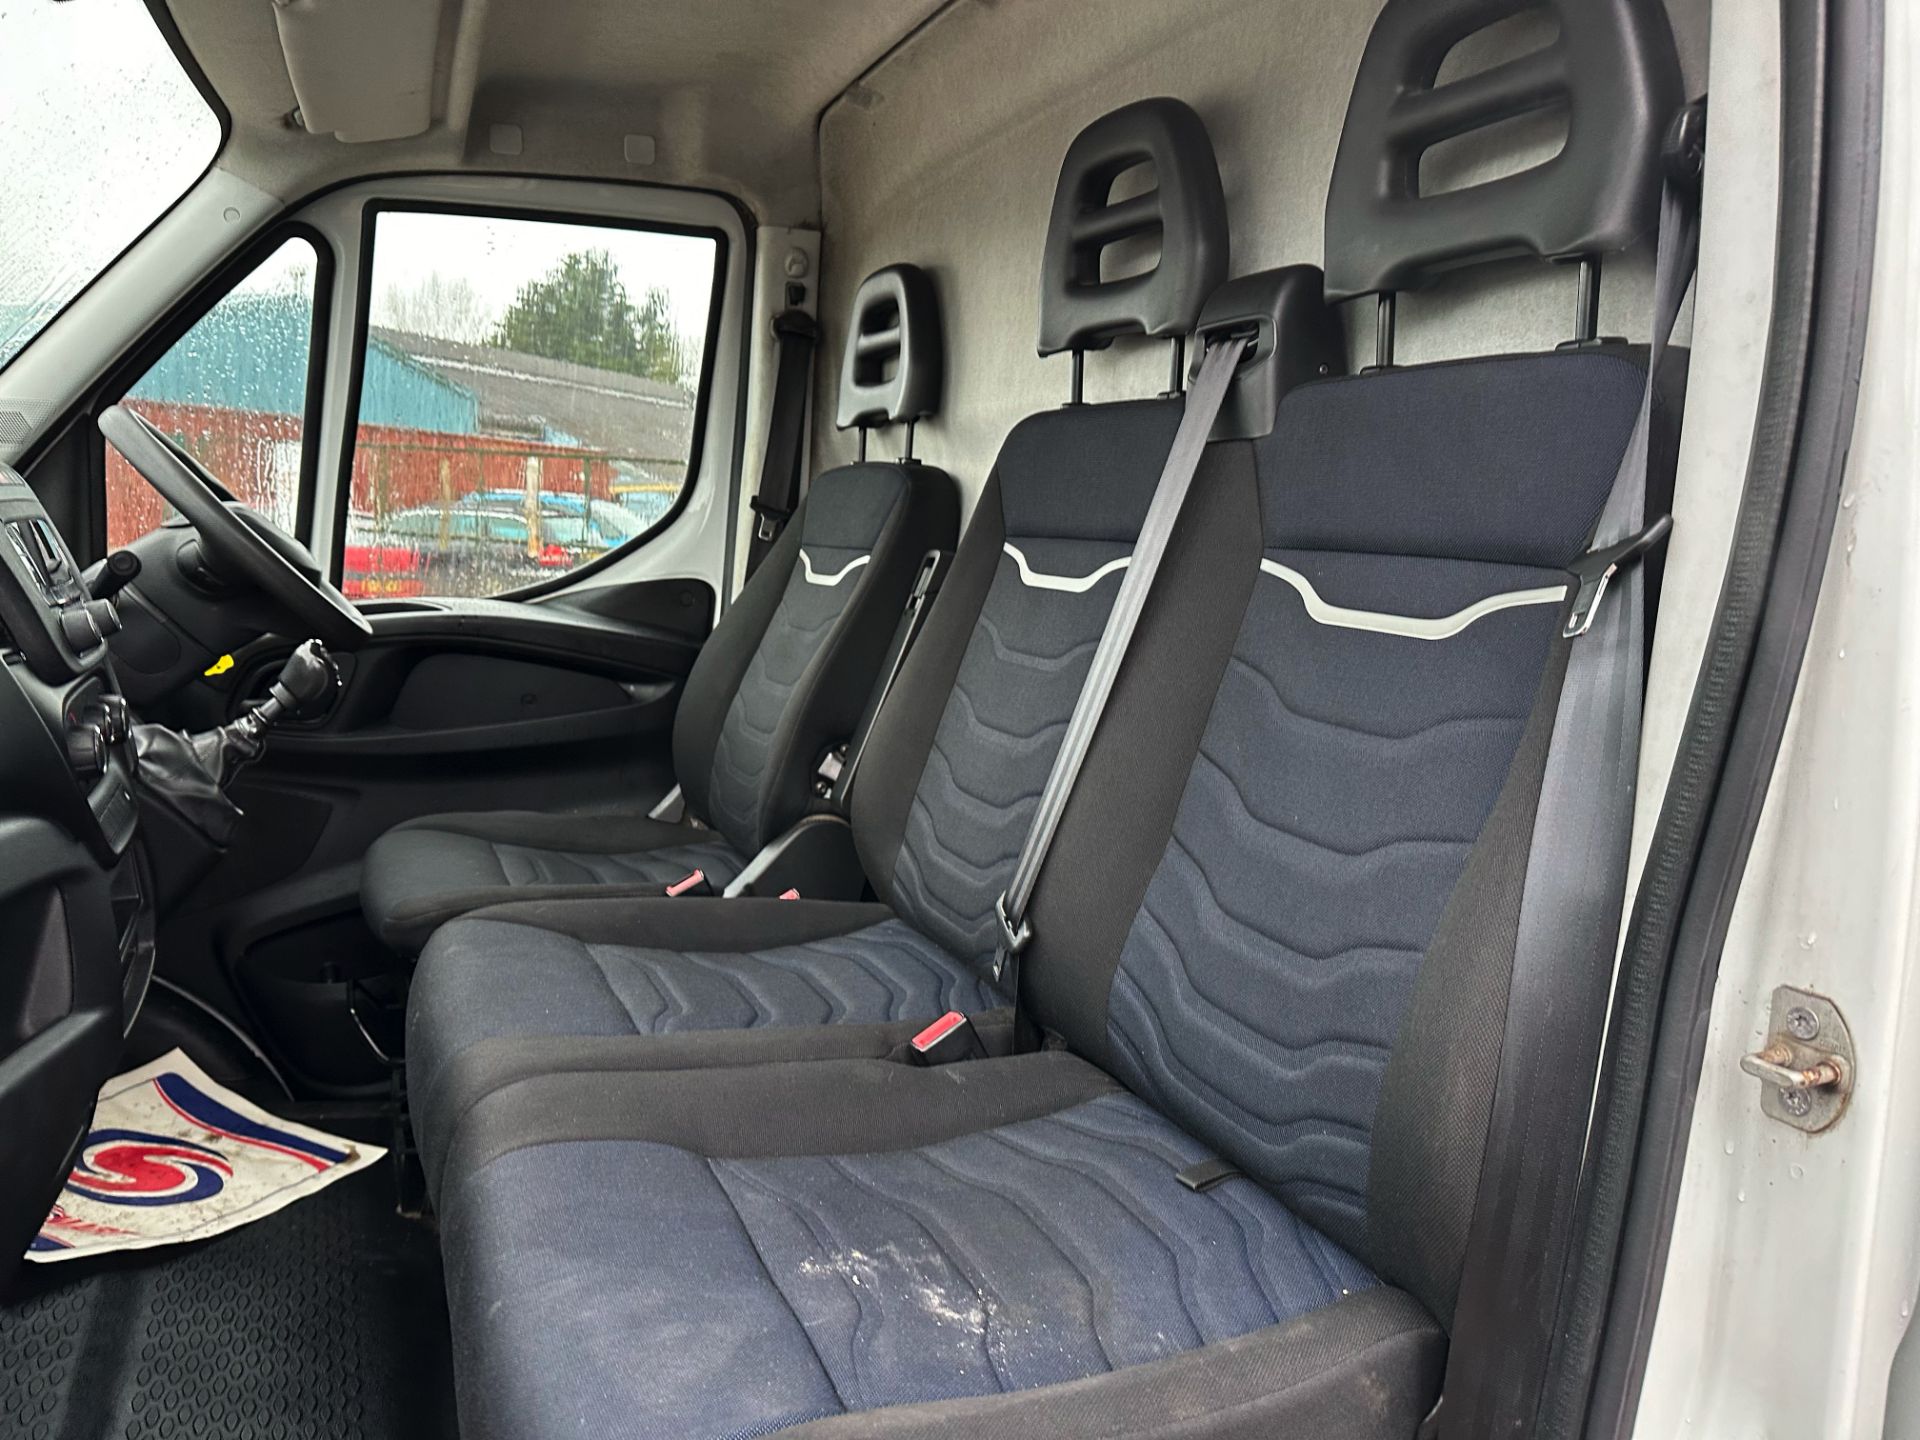 Iveco Daily 35-140 Long Wheel Base High Roof - 2021 Reg (New Shape) Only 85K Miles - Air Con - Look! - Image 15 of 27